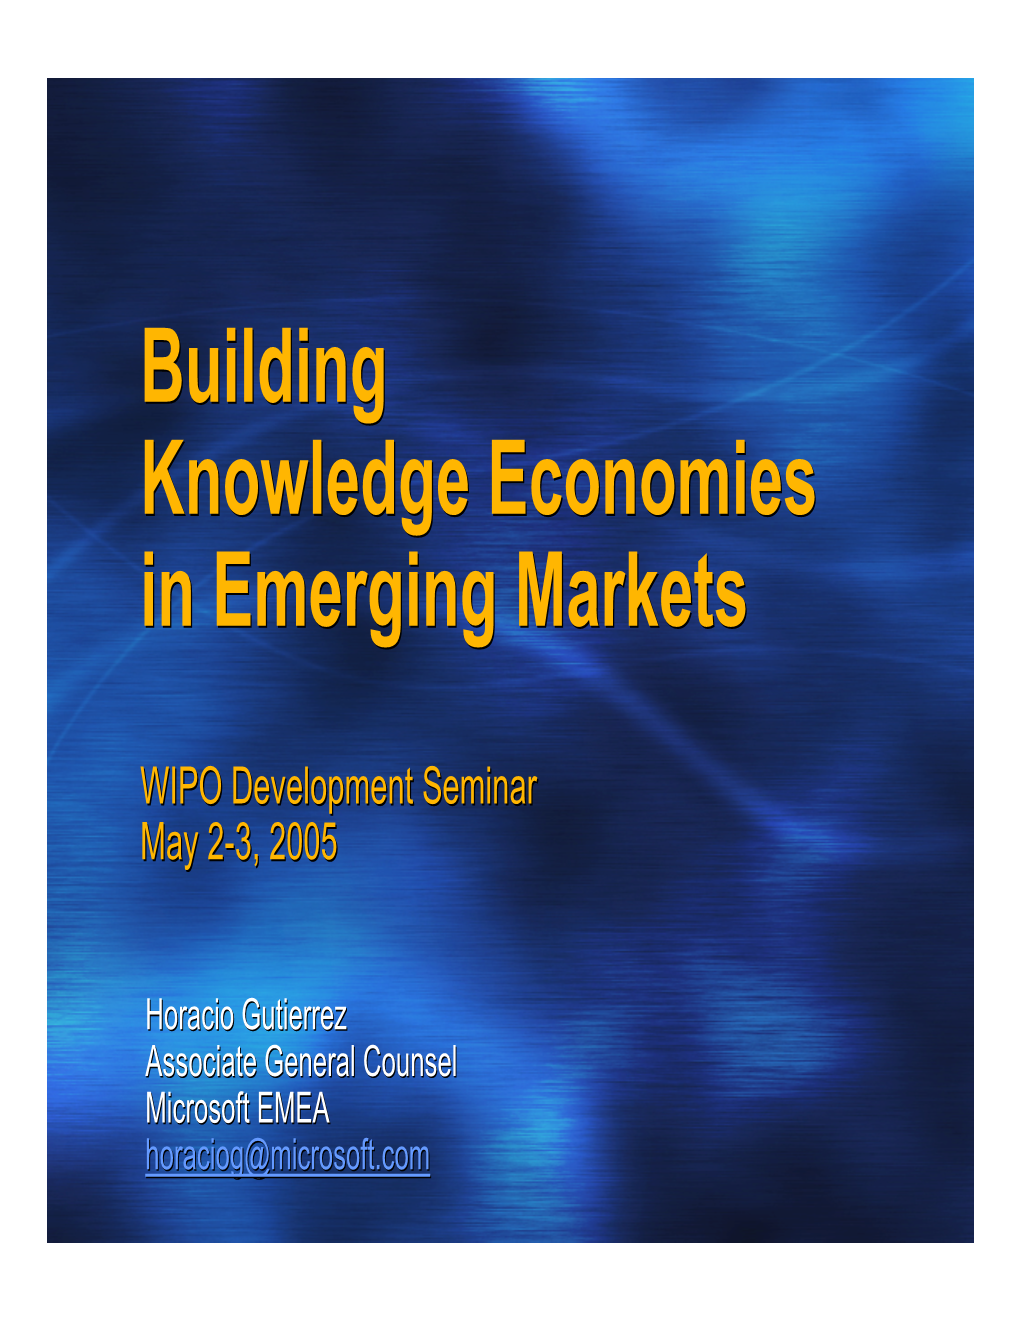 Building Knowledge Economies in Emerging Markets